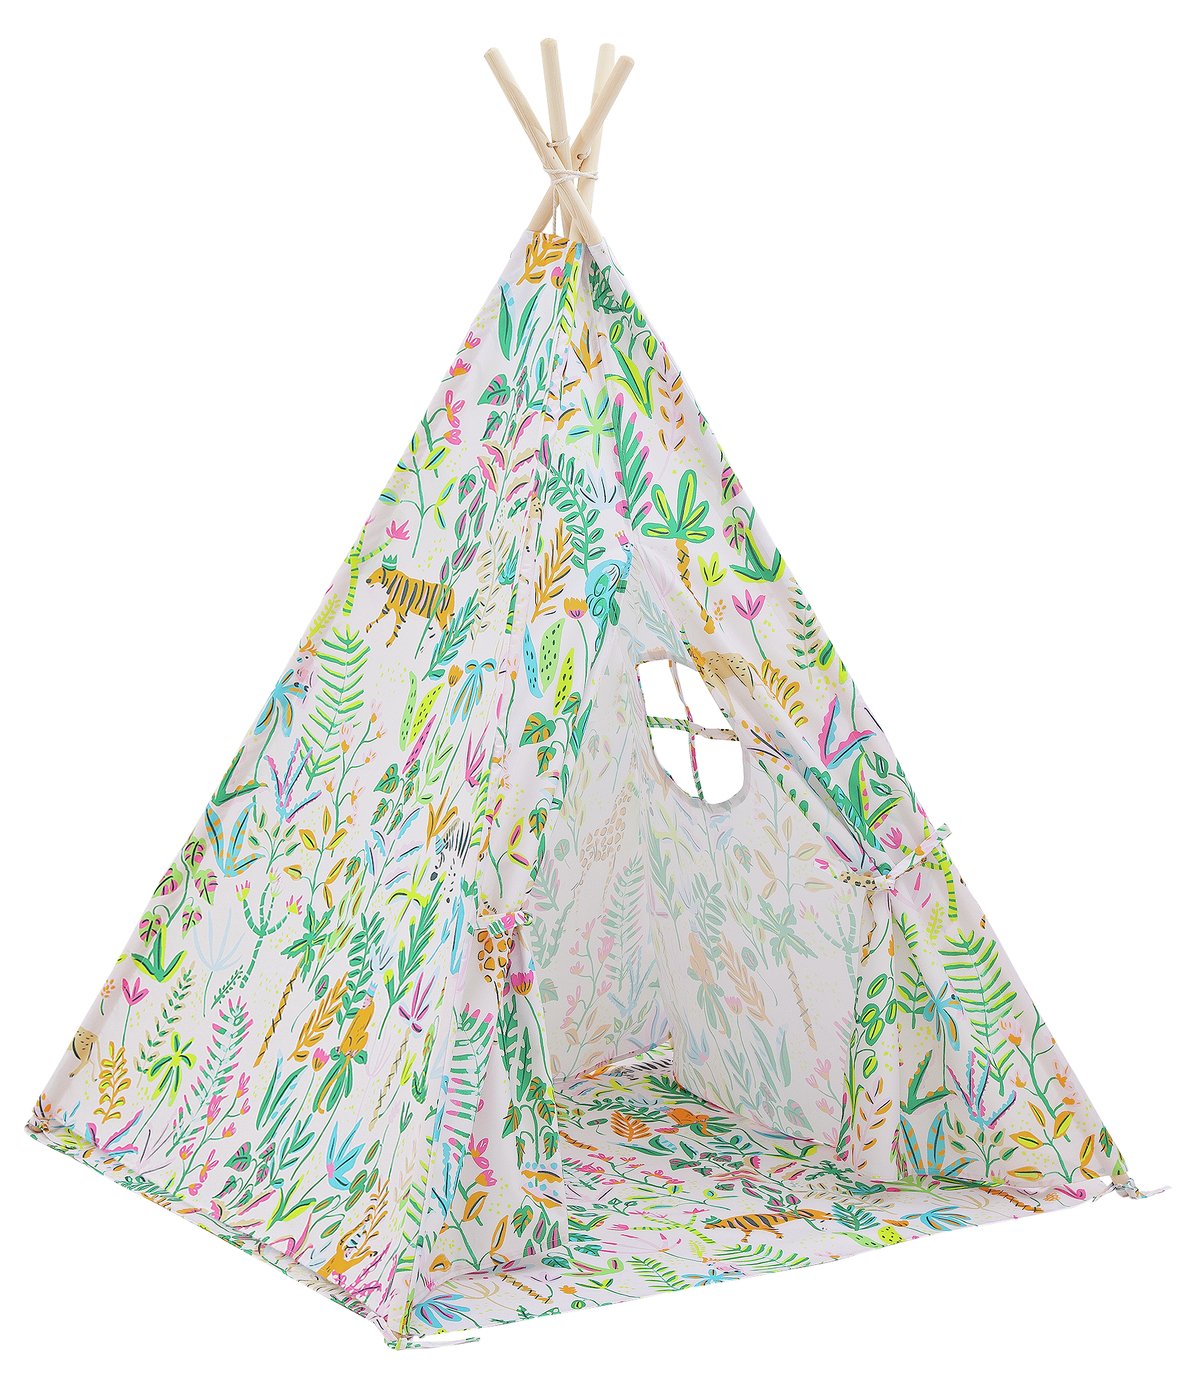 argos childrens play tents